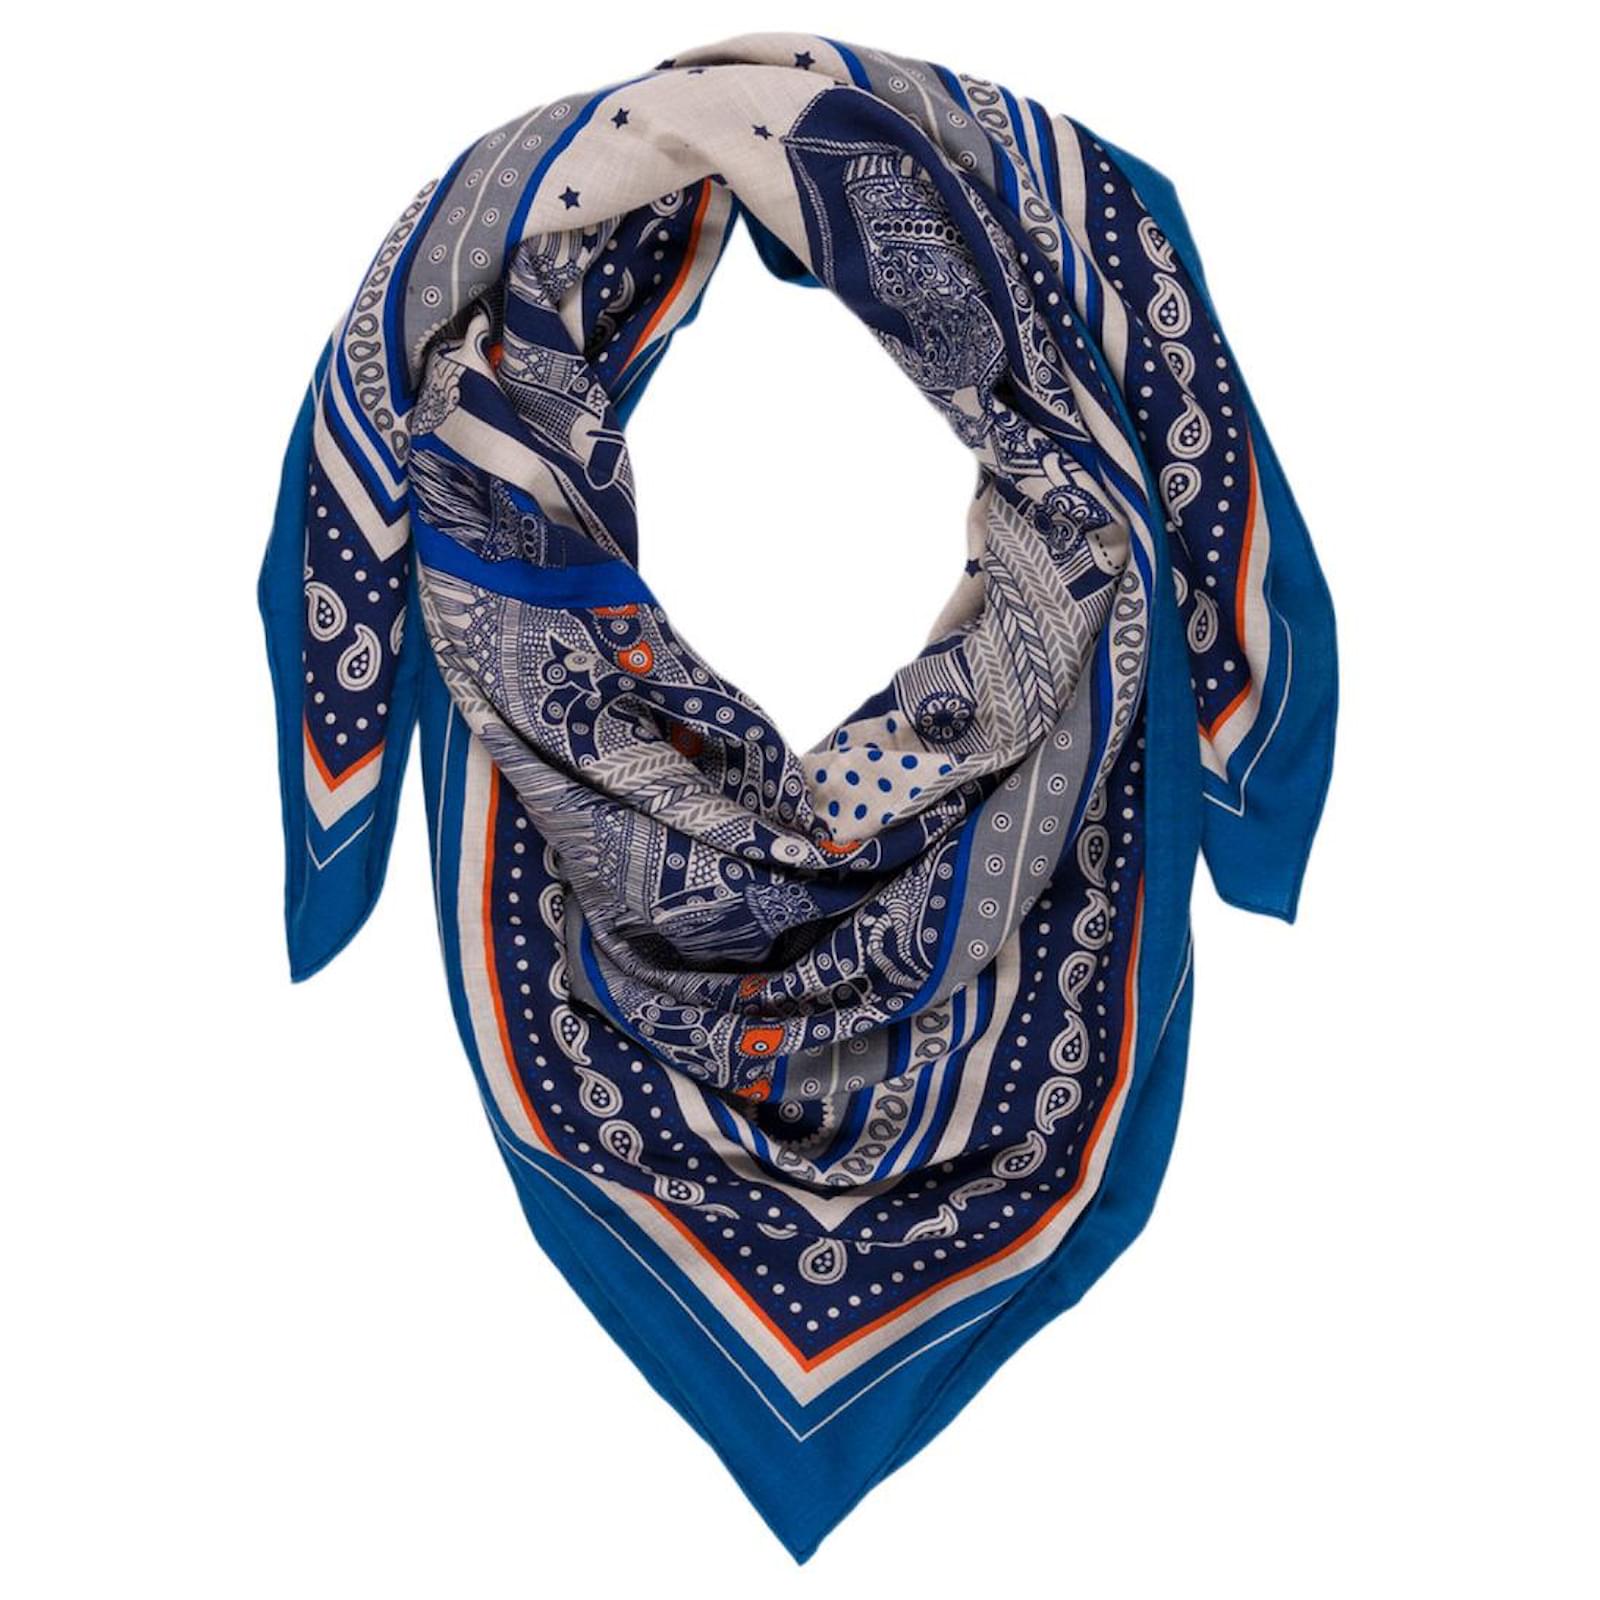 HERMES Paisley from Paisley Shawl in Multicolored Cashmere and